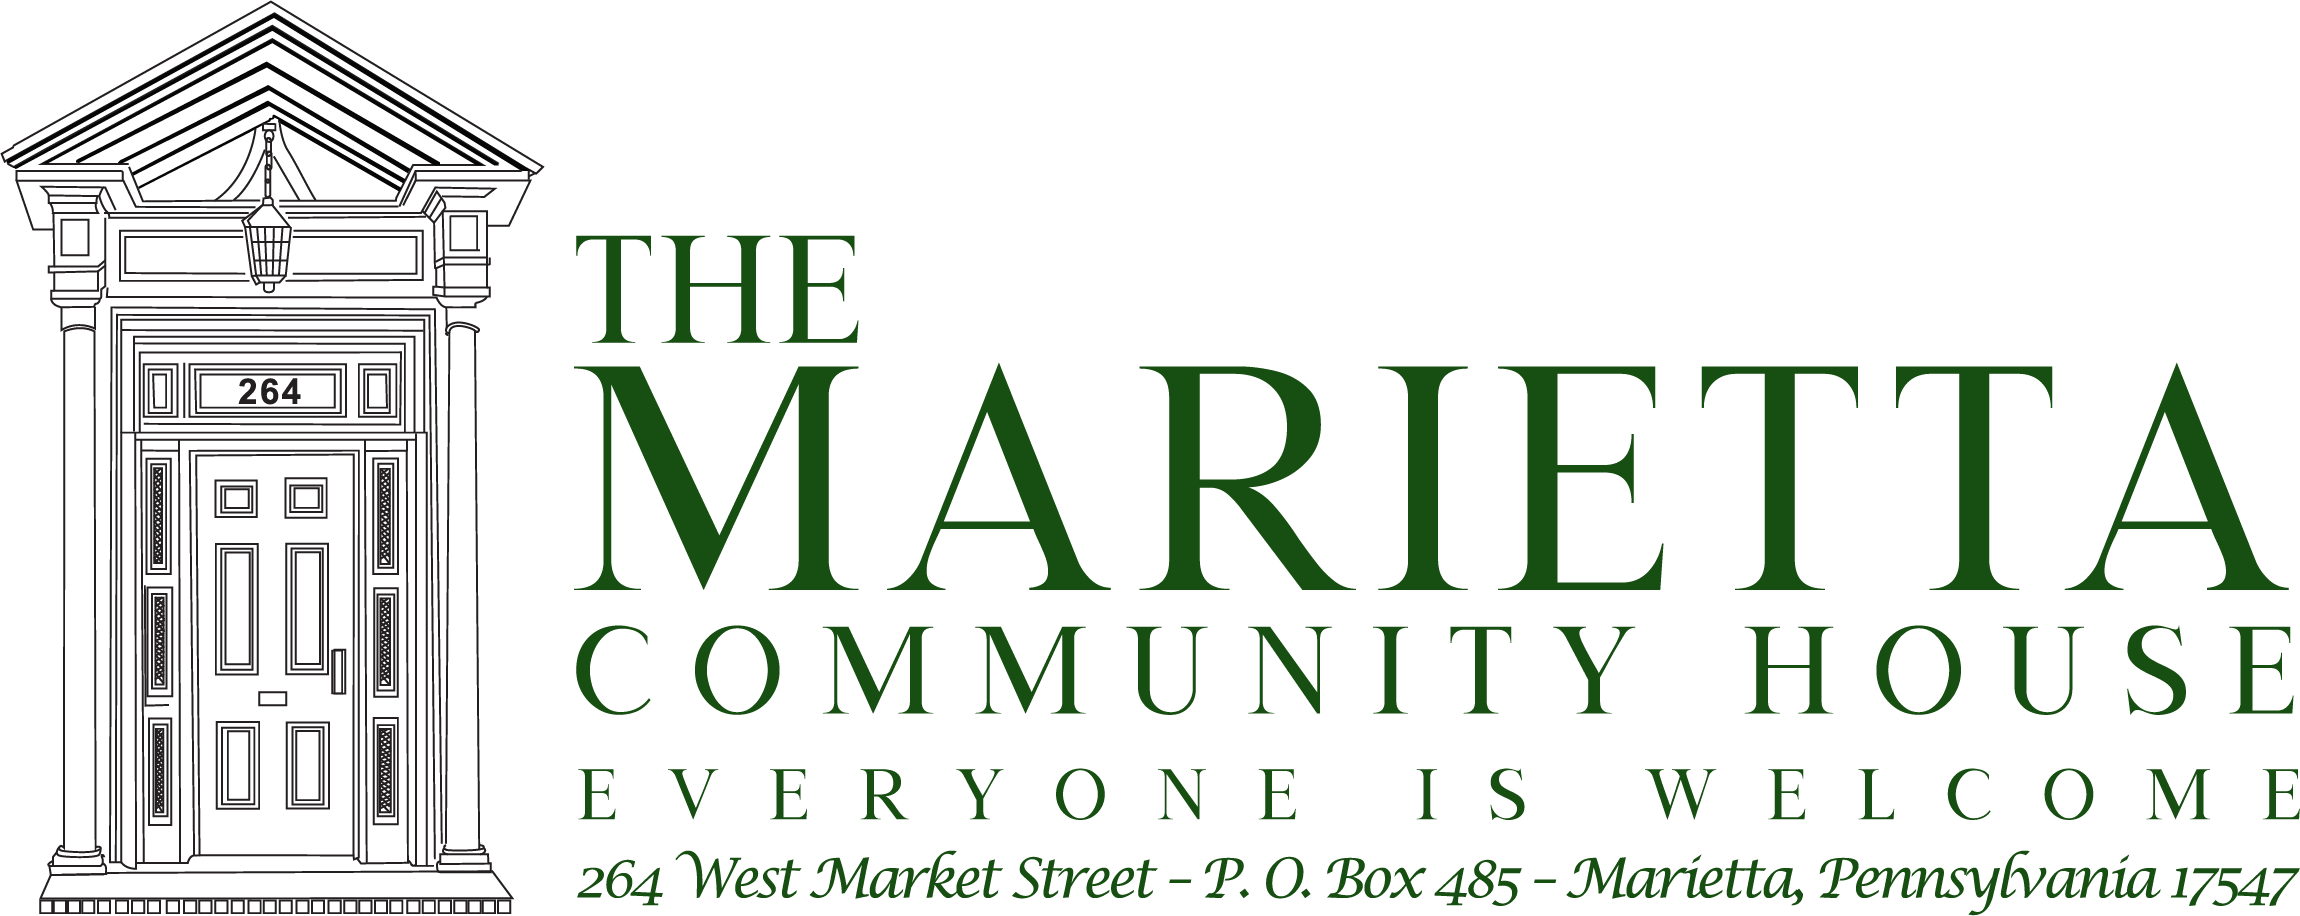 The Marietta Community House: A wedding and events venue, community center, and meeting place in Marietta, Pennsylvania